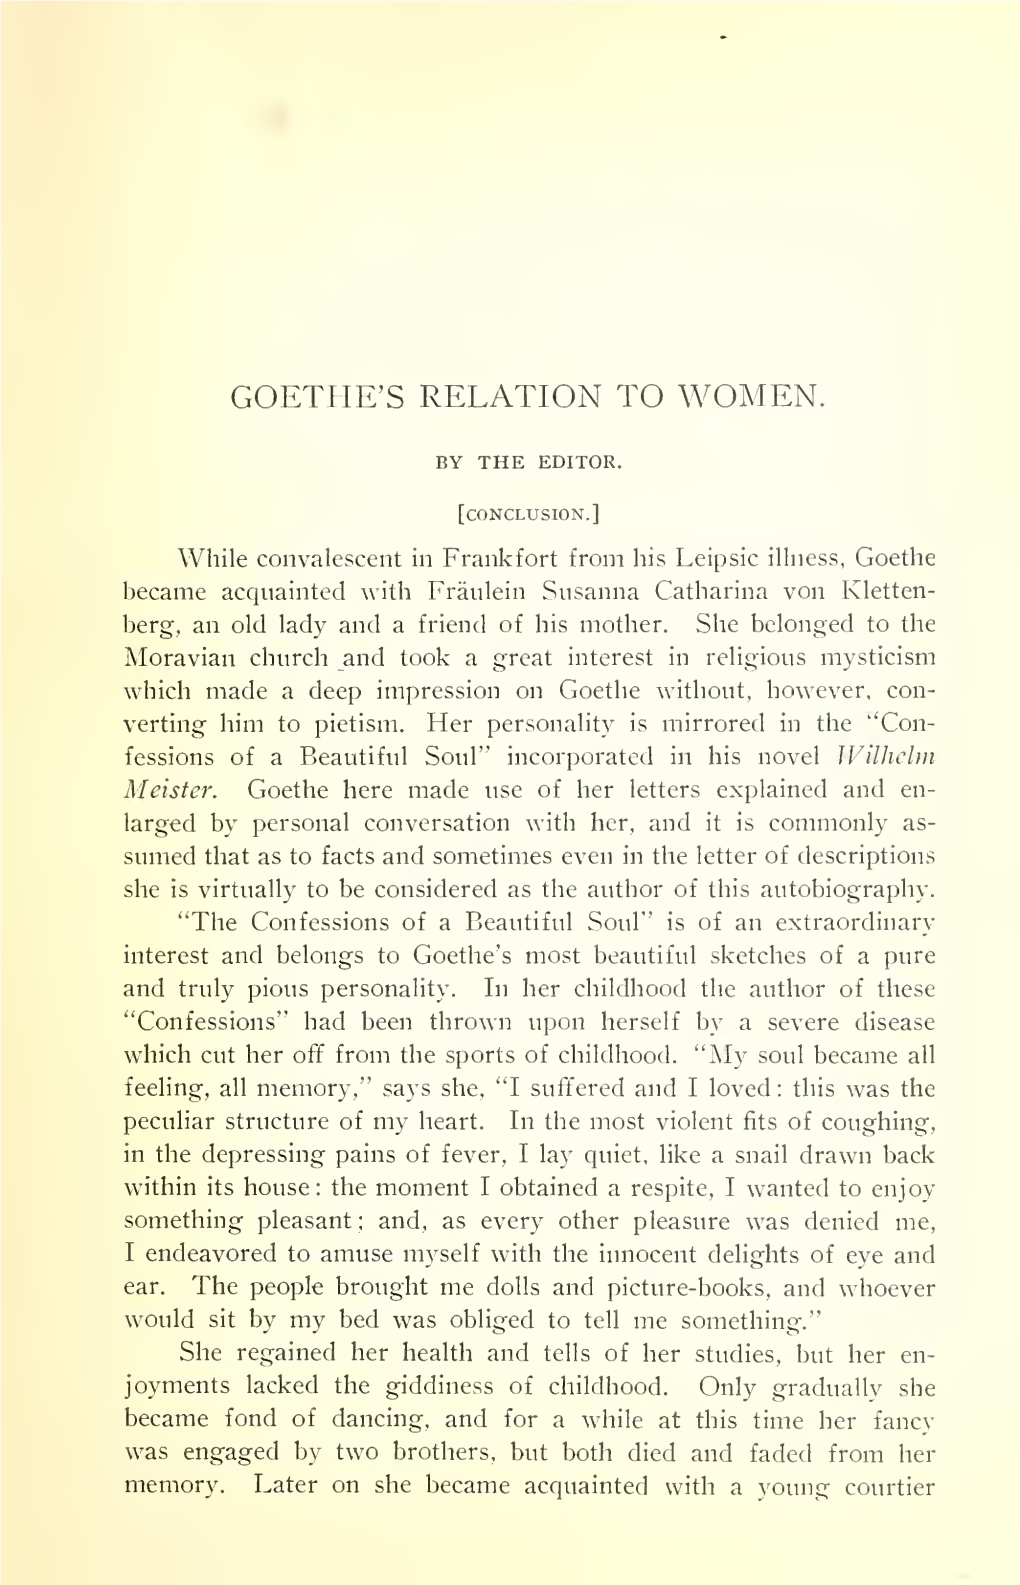 Goethe's Relation to Women. Conclusion. (Illustrated.)